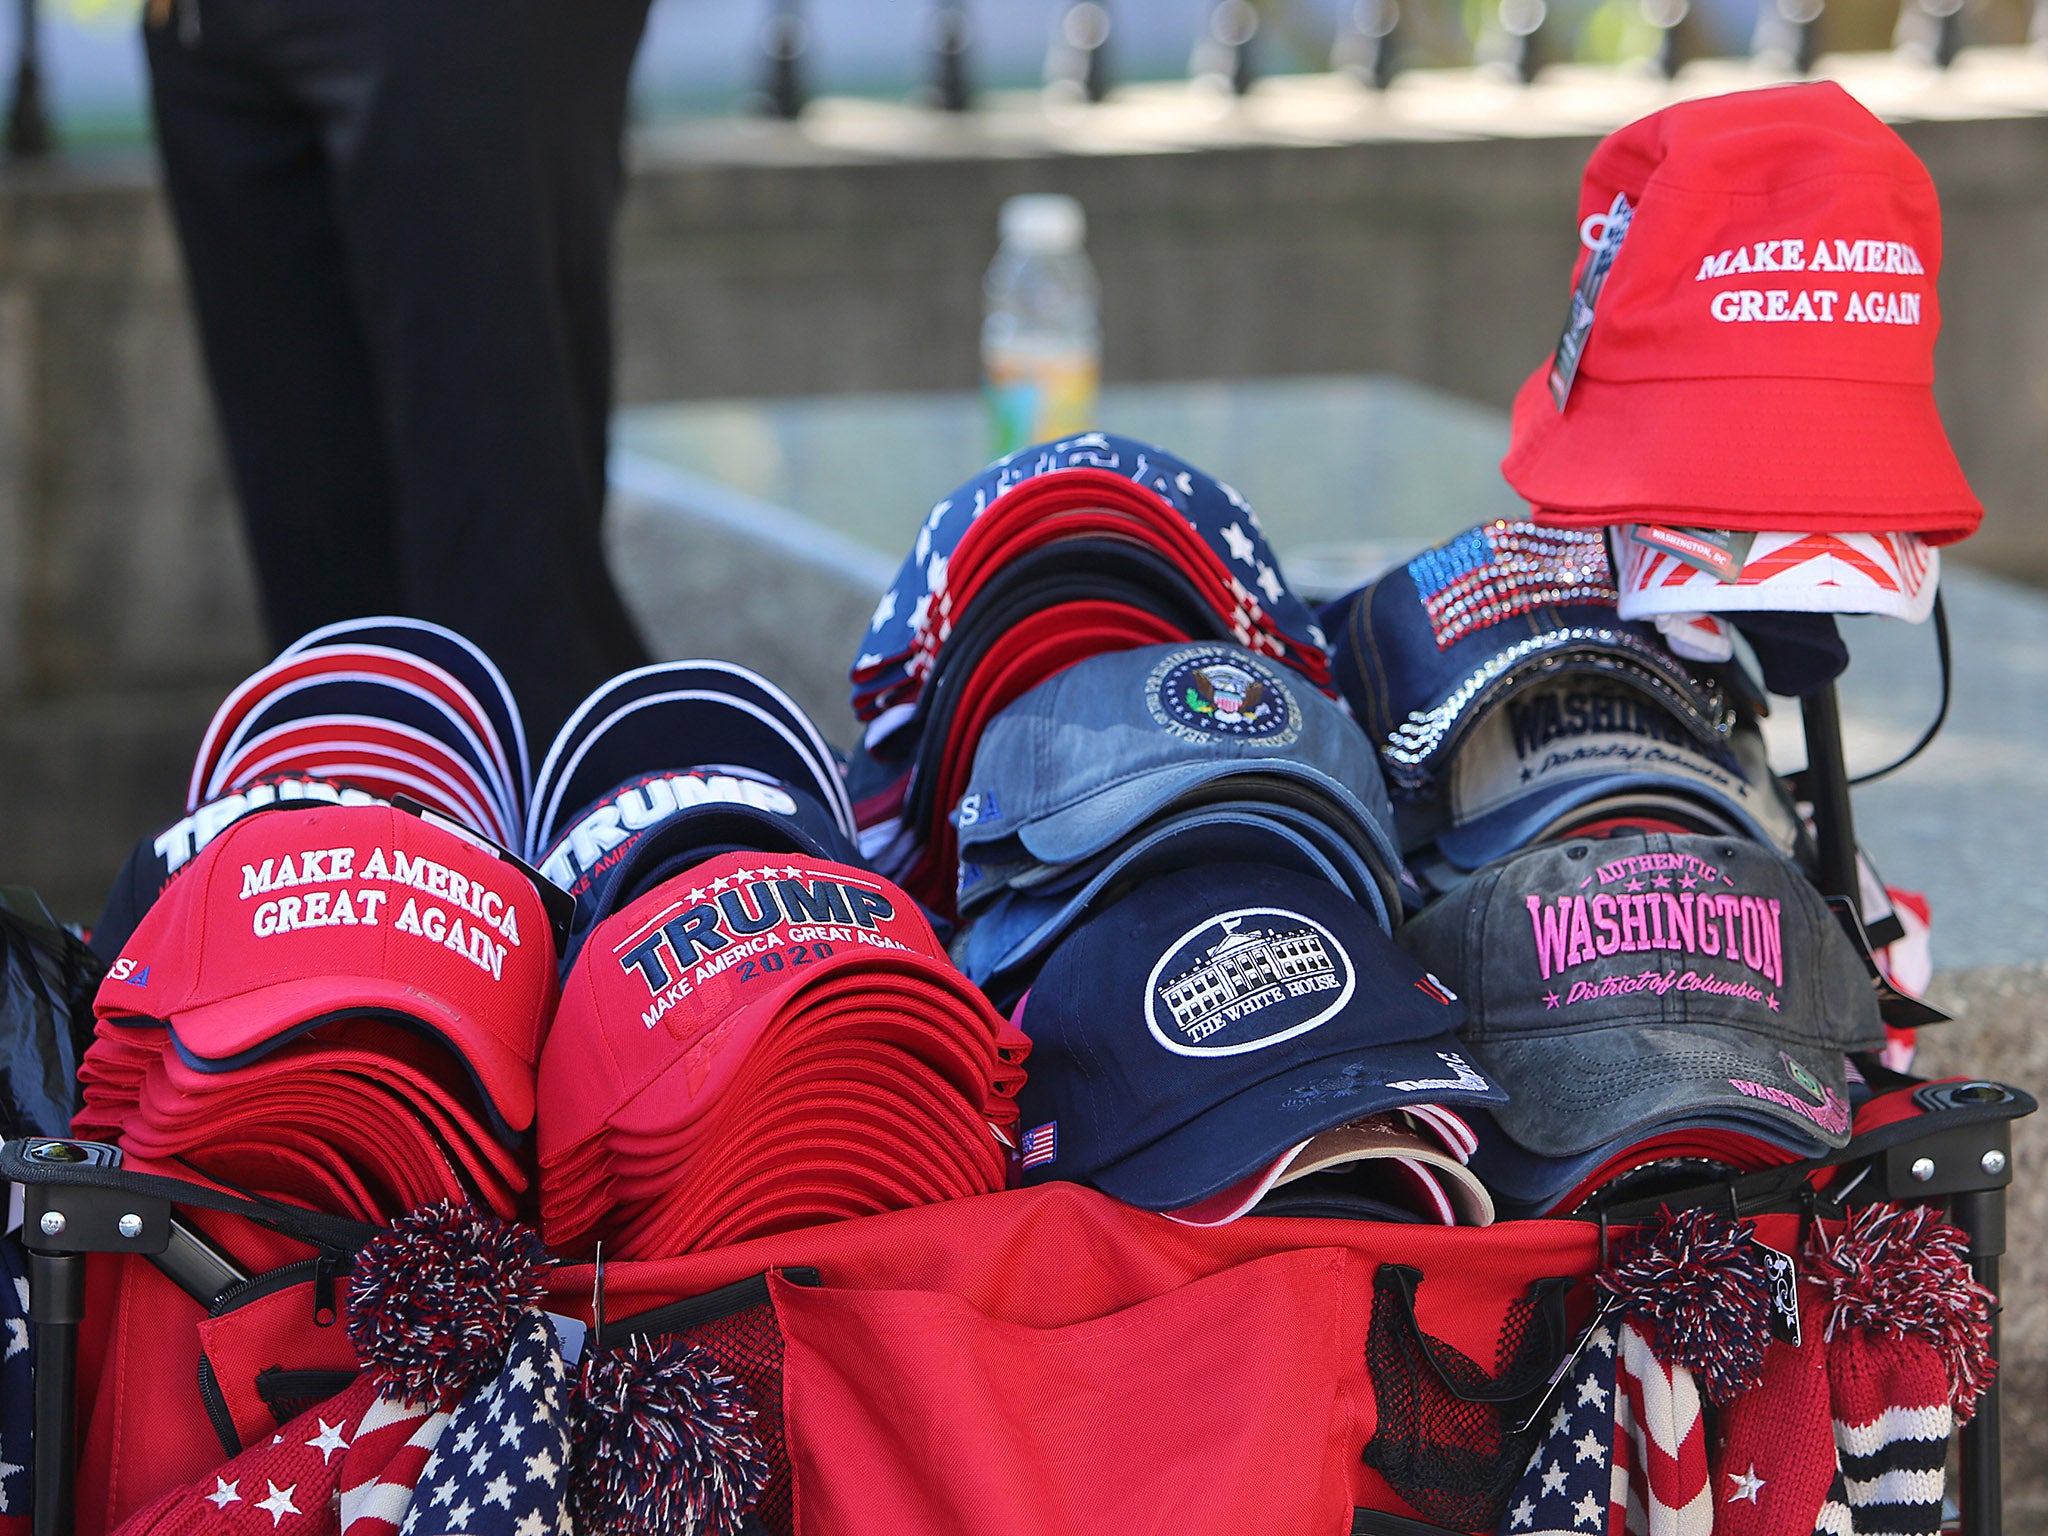 More than a million Maga hats have been sold since 2016